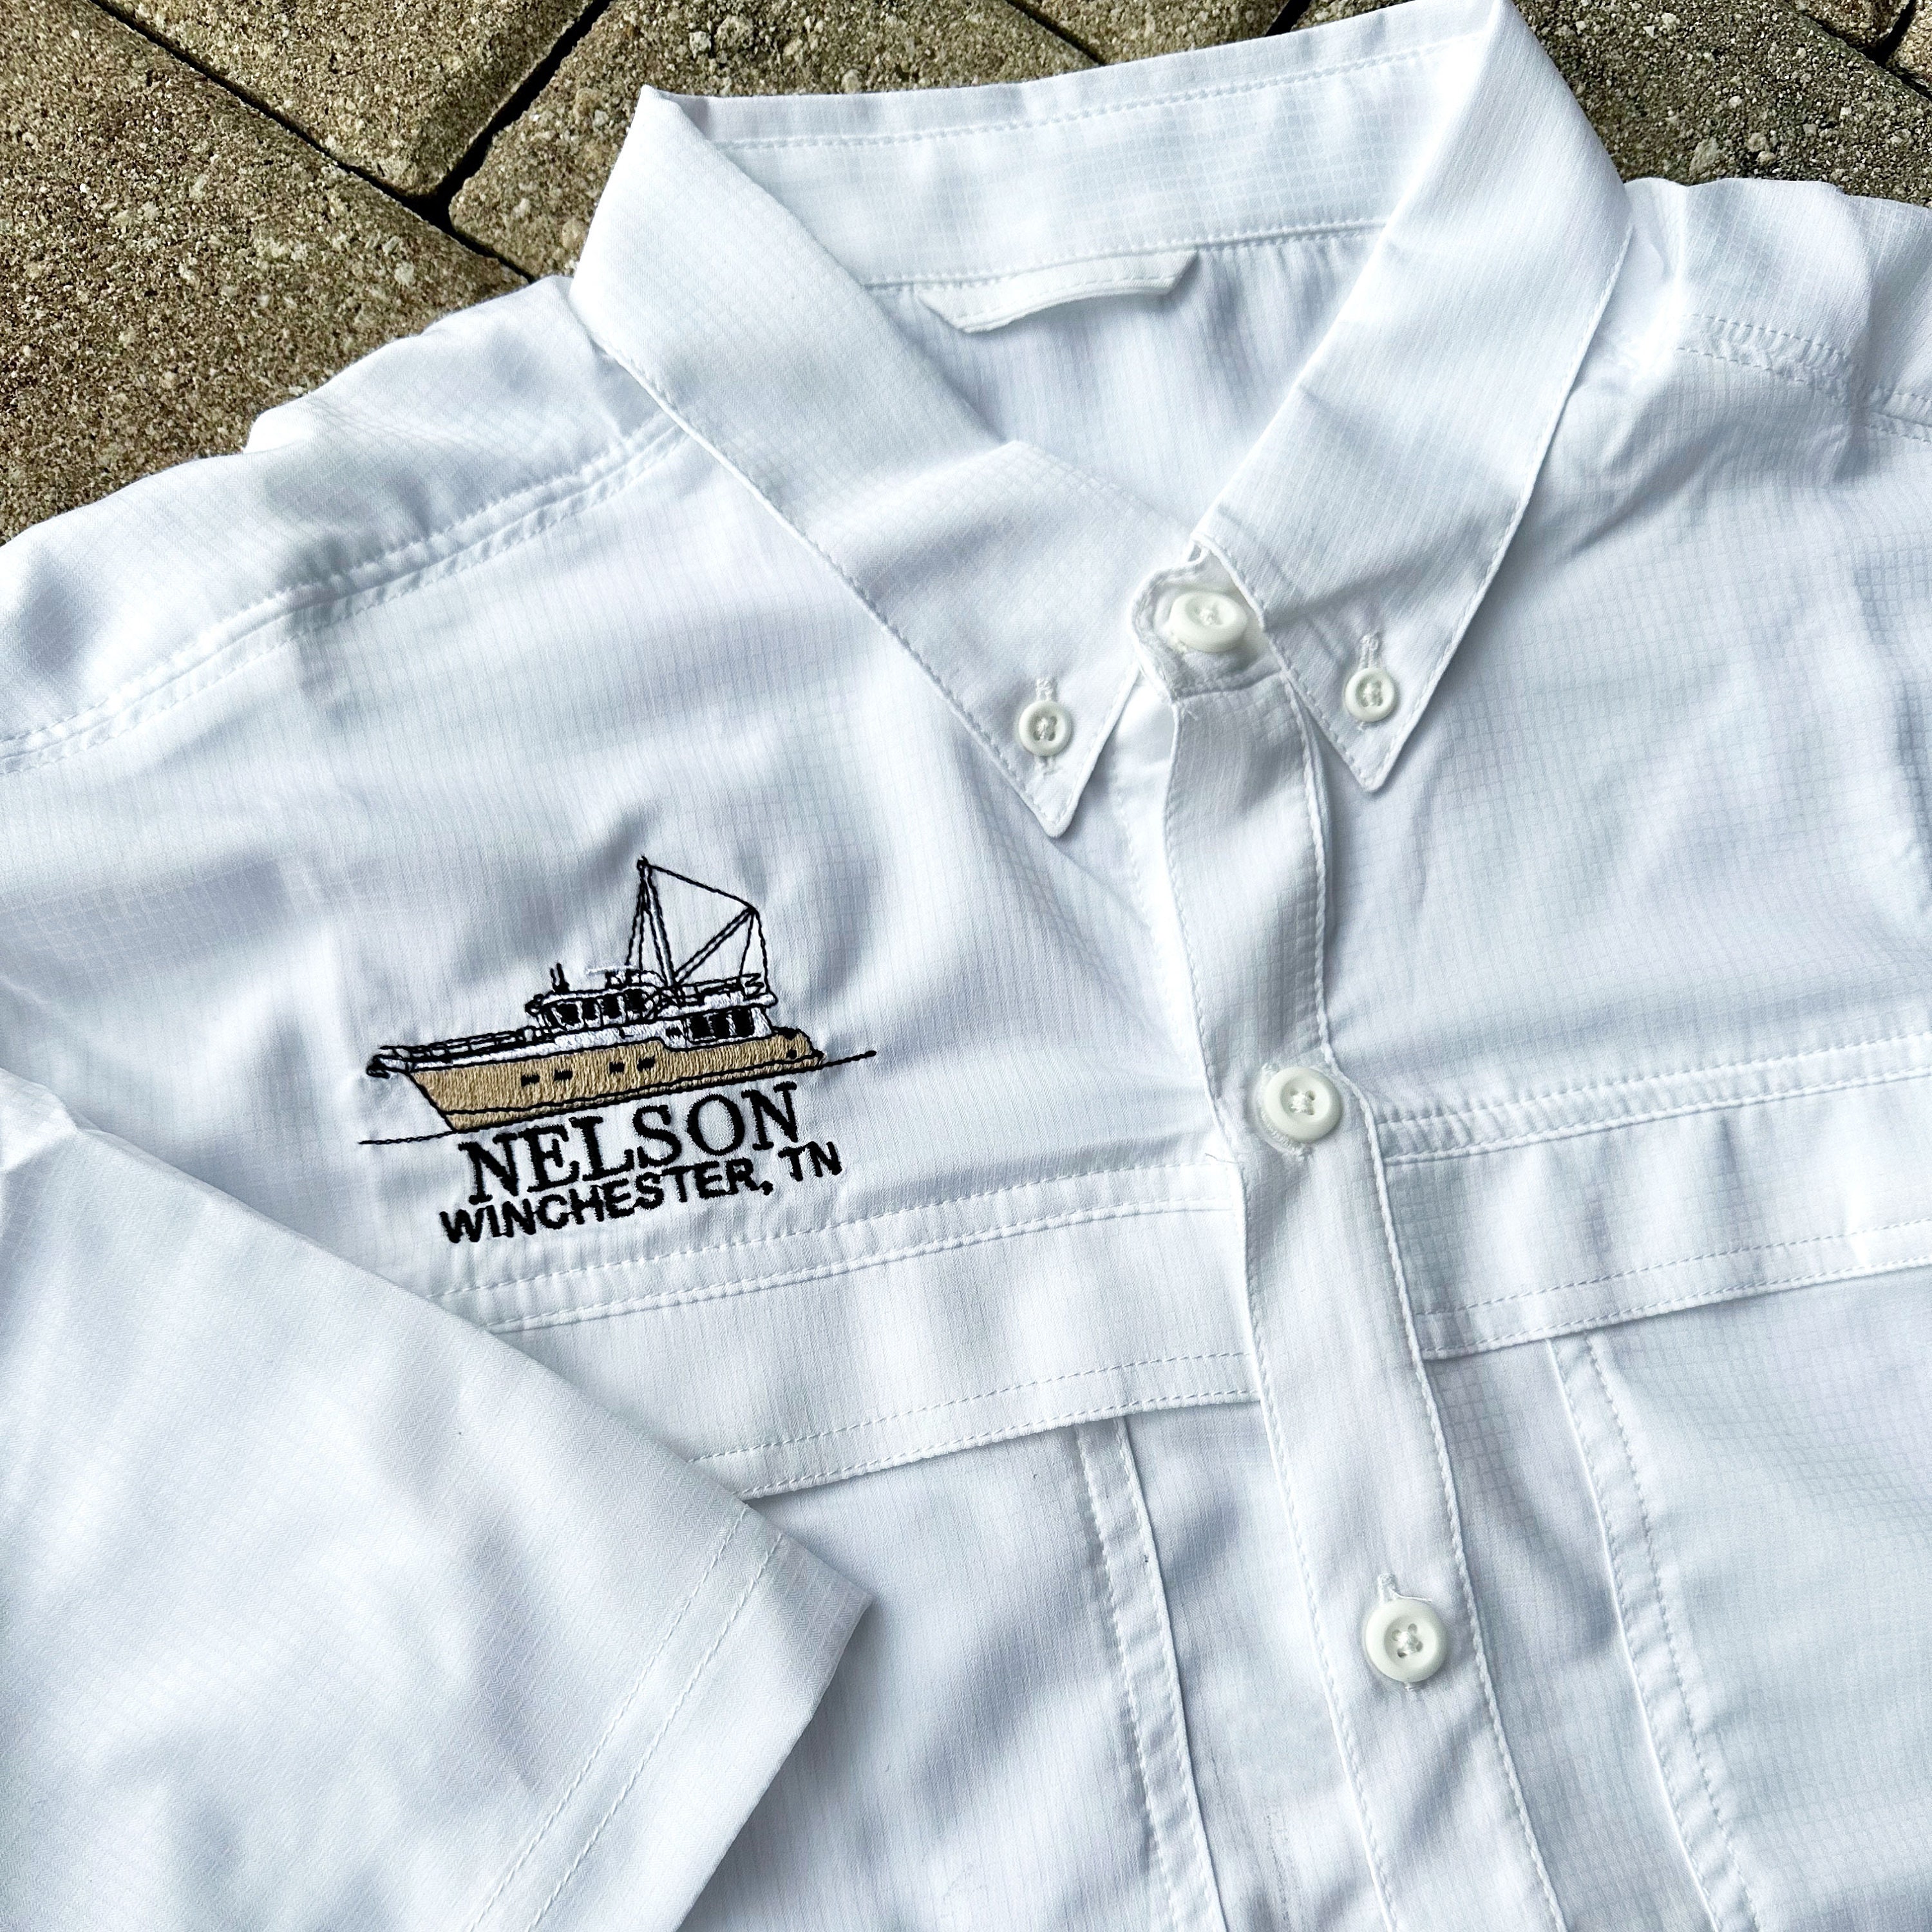 Short Sleeve Fishing Shirt with Embroidered Venturing Logo